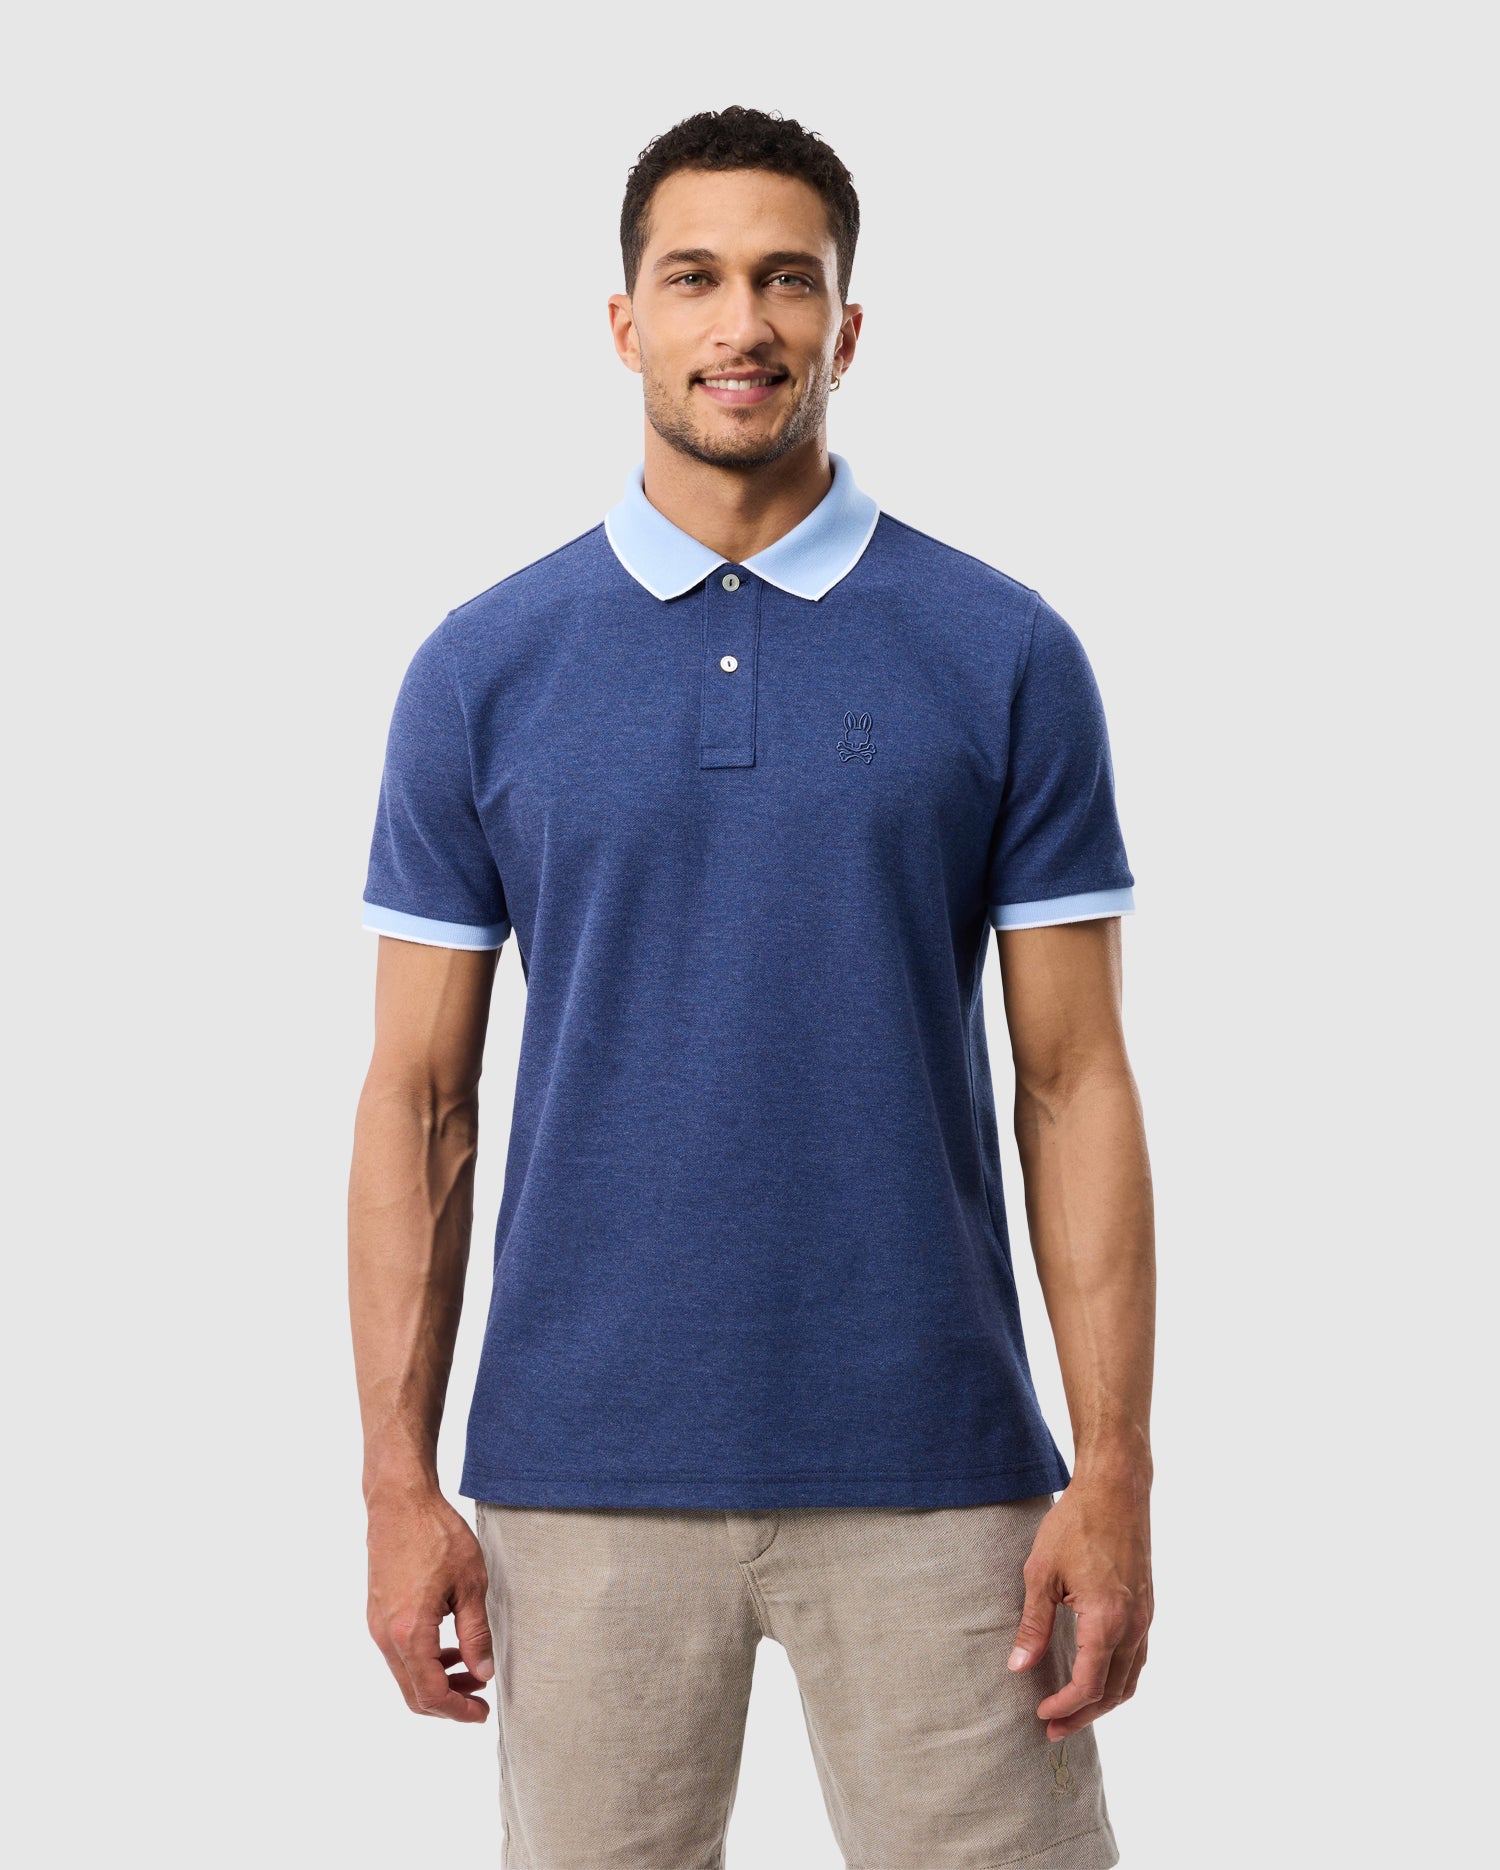 A man with short hair is smiling and wearing a blue Psycho Bunny MENS WINDCREST PIQUE POLO SHIRT - B6K592C200 with light blue trim on the collar and sleeves. He is also donning beige pants, standing against a plain, light gray background.